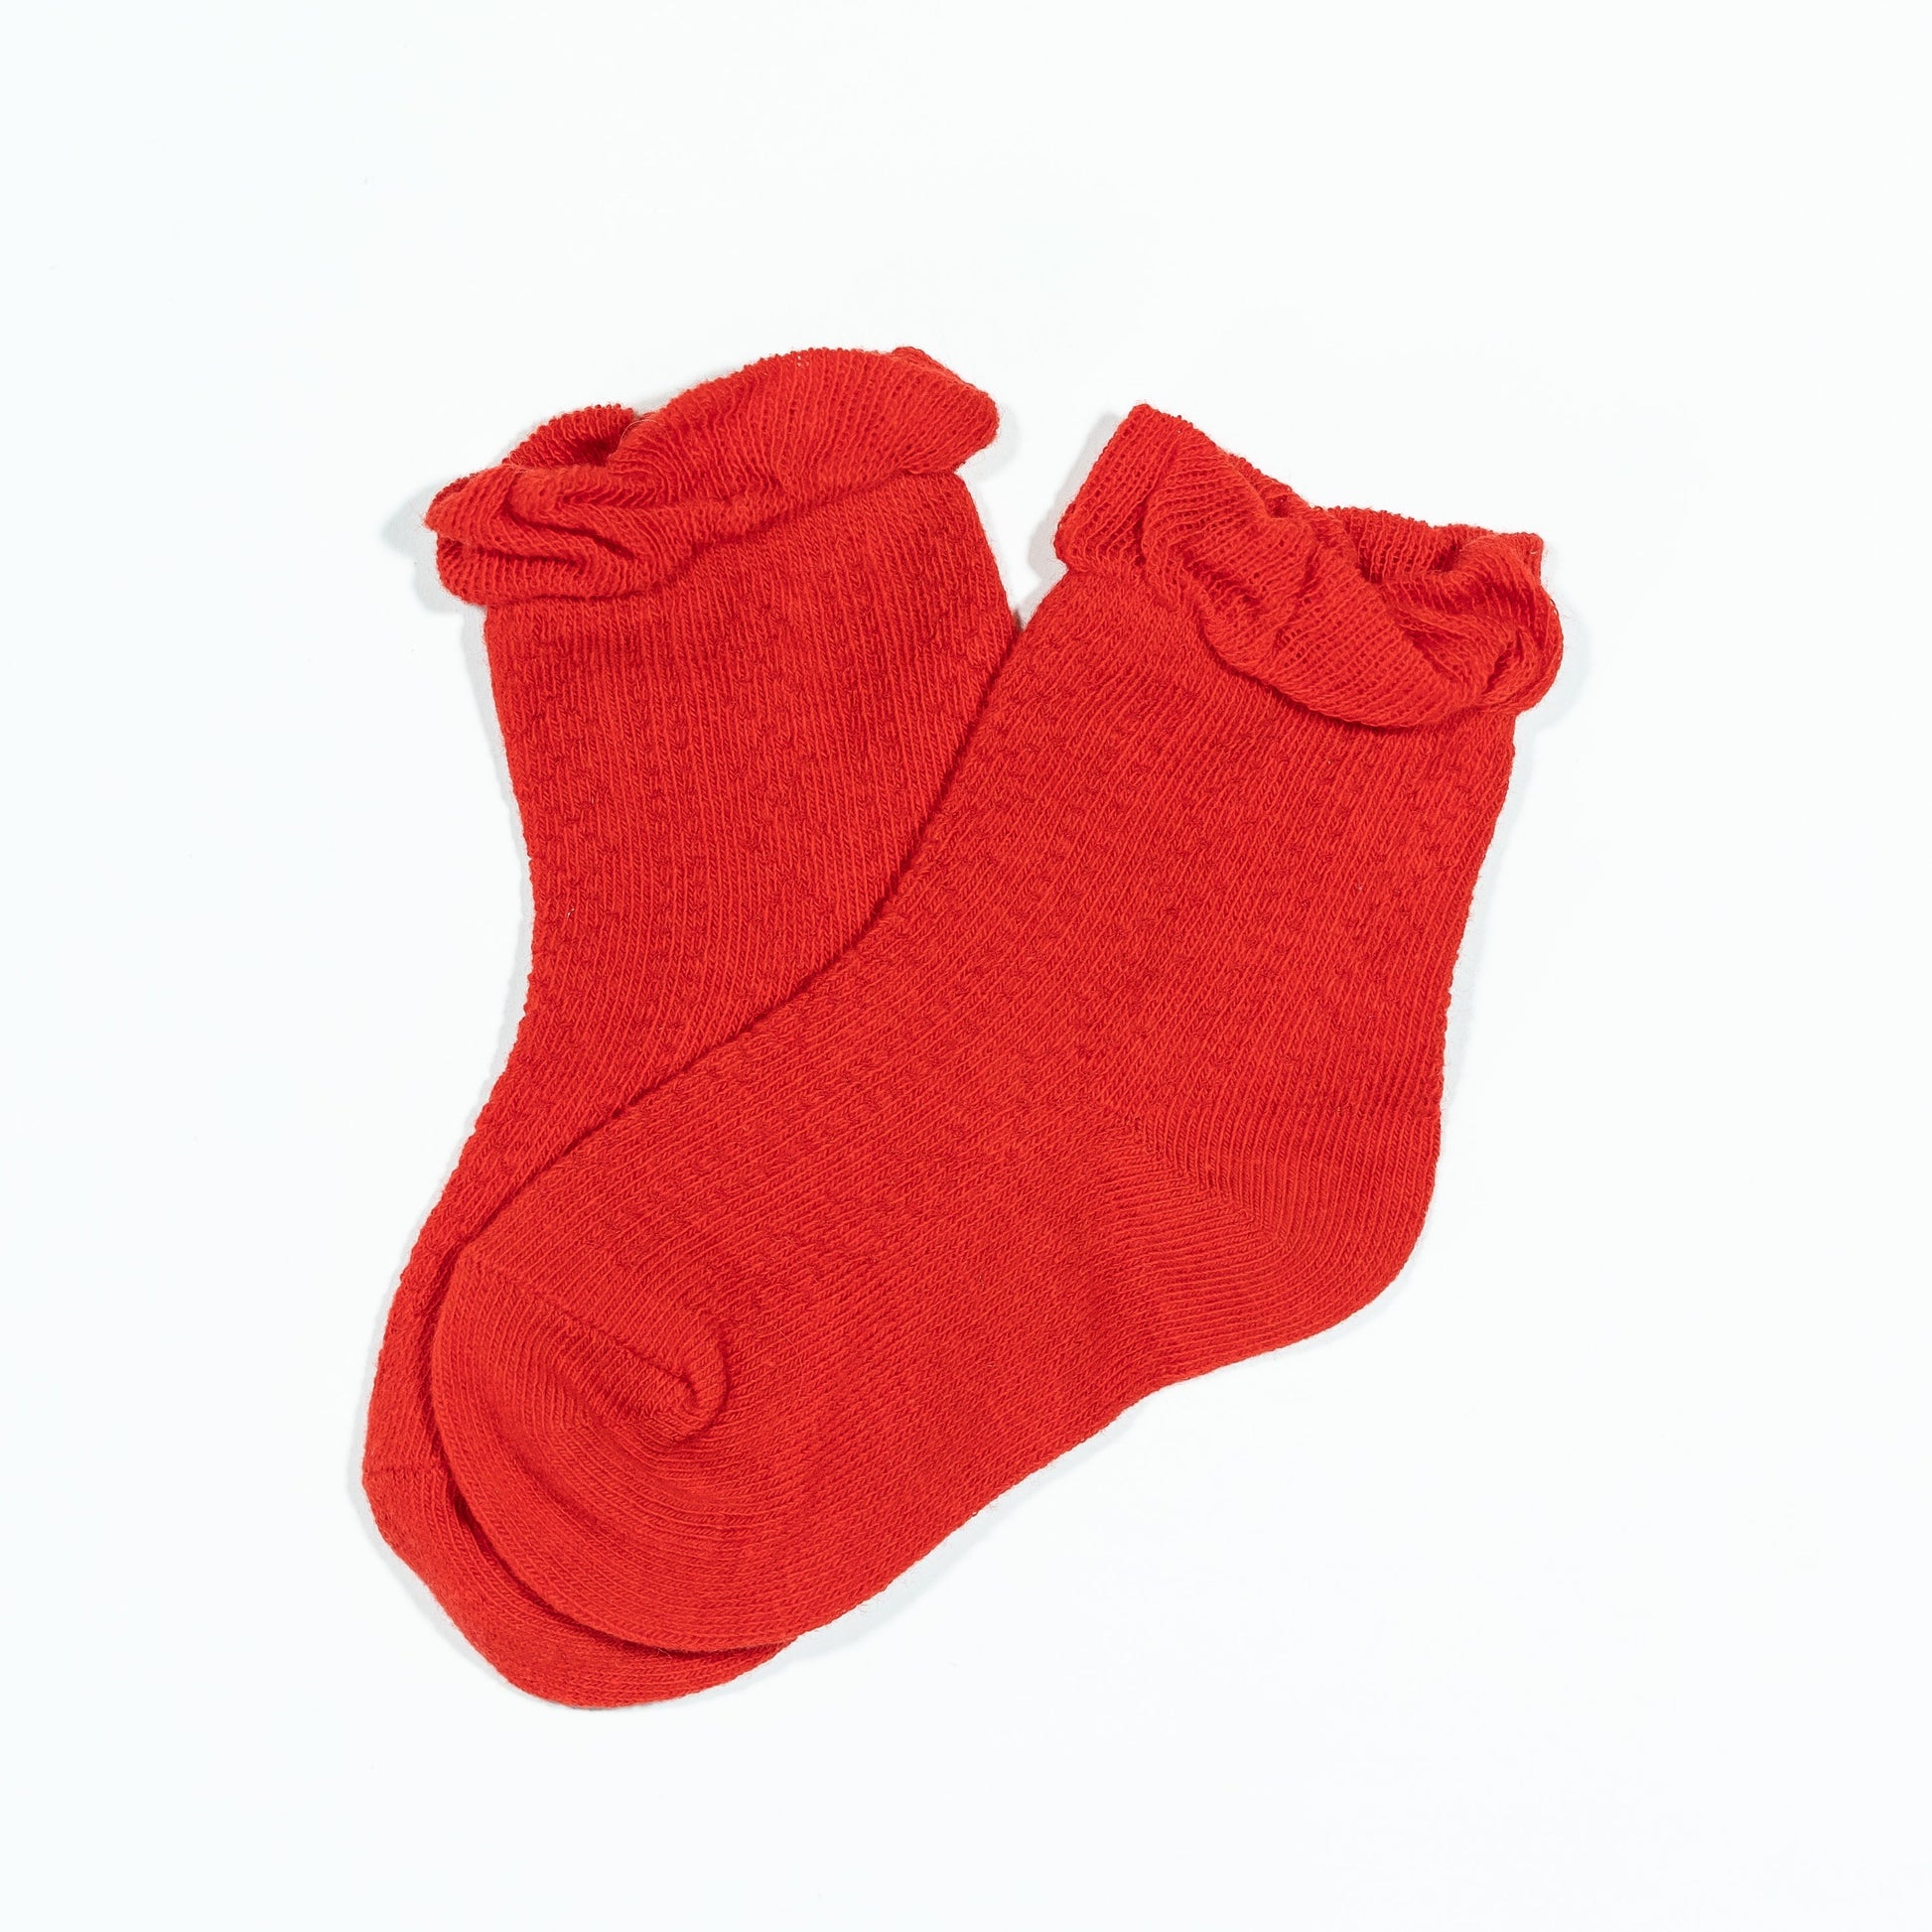 Ruffle Anklet Socks in Bright Red 0-6 months - Doodlebug's Children's Boutique